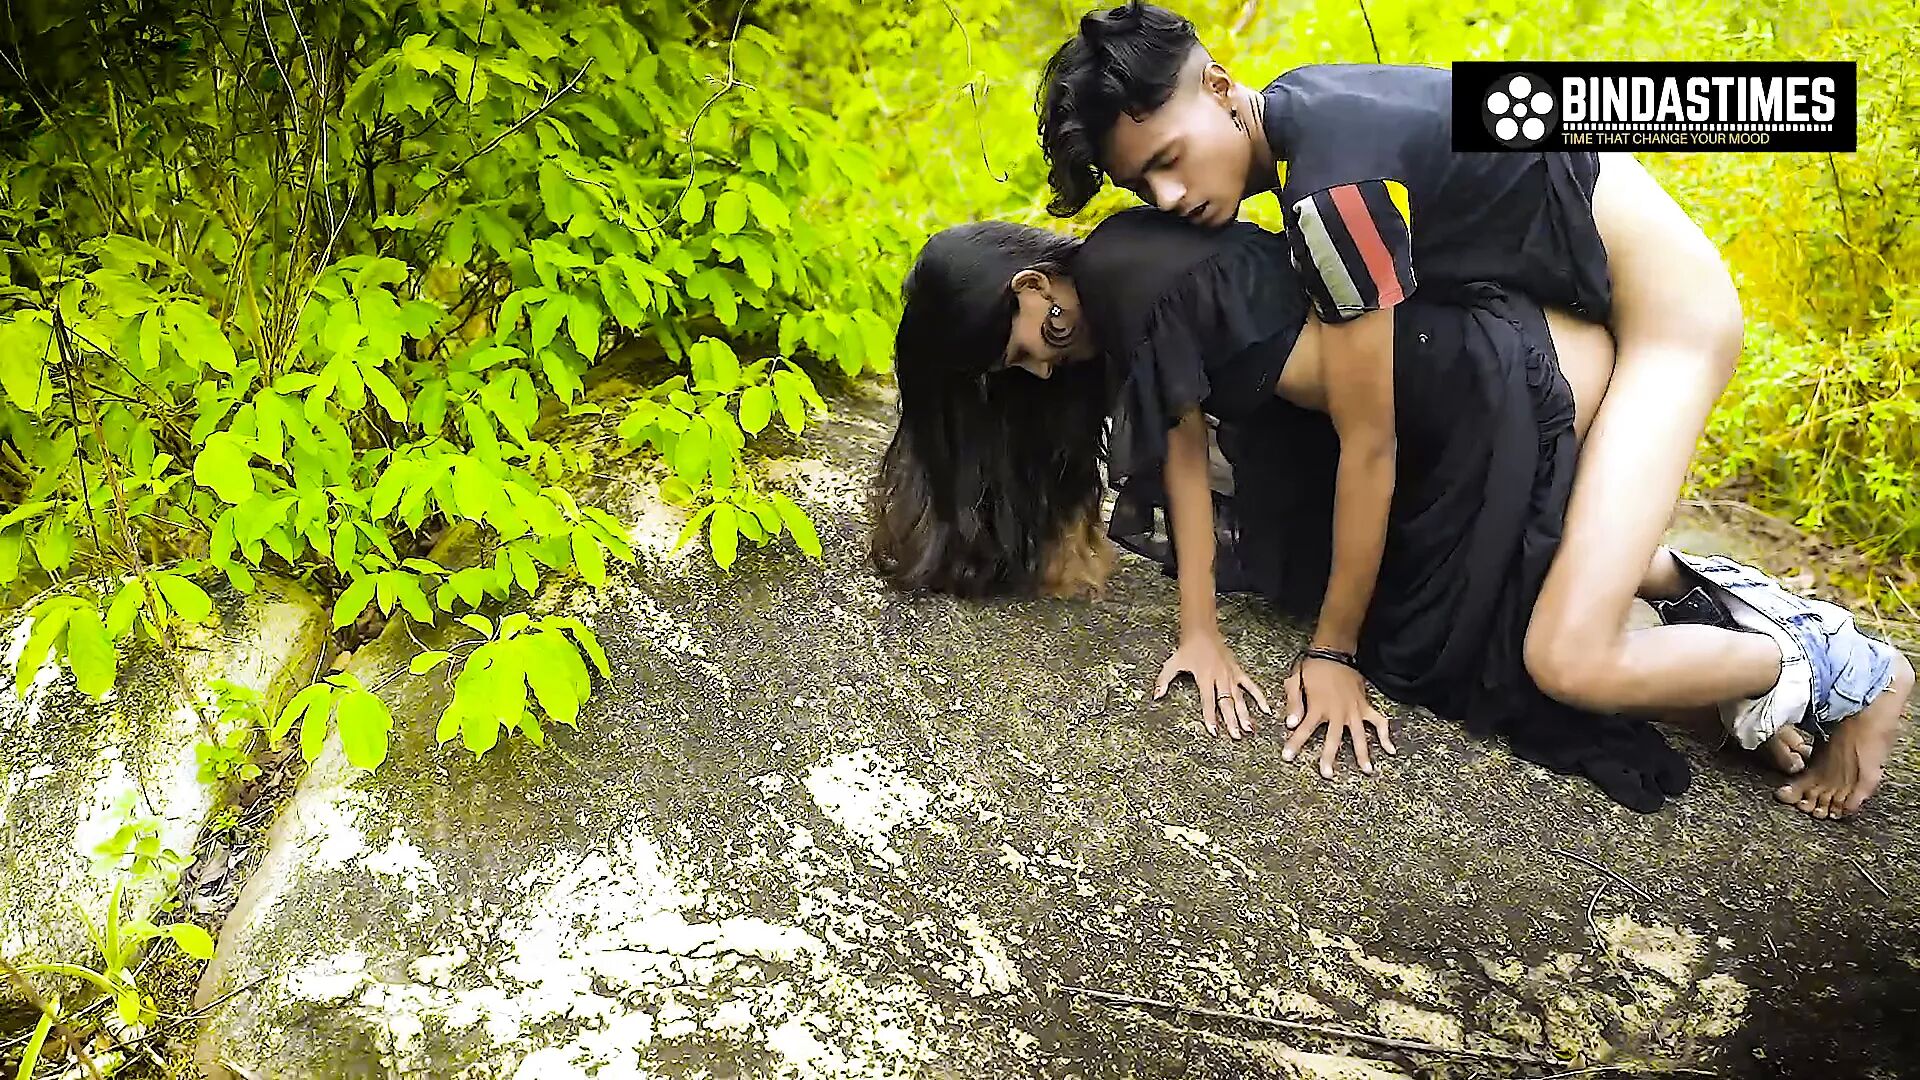 Jangal Xxx Six Love - Oh Dear Mountain Boy Fucks His Girlfriend Sudipa in the Jungle Openly Hindi  Clear Audio watch online or download